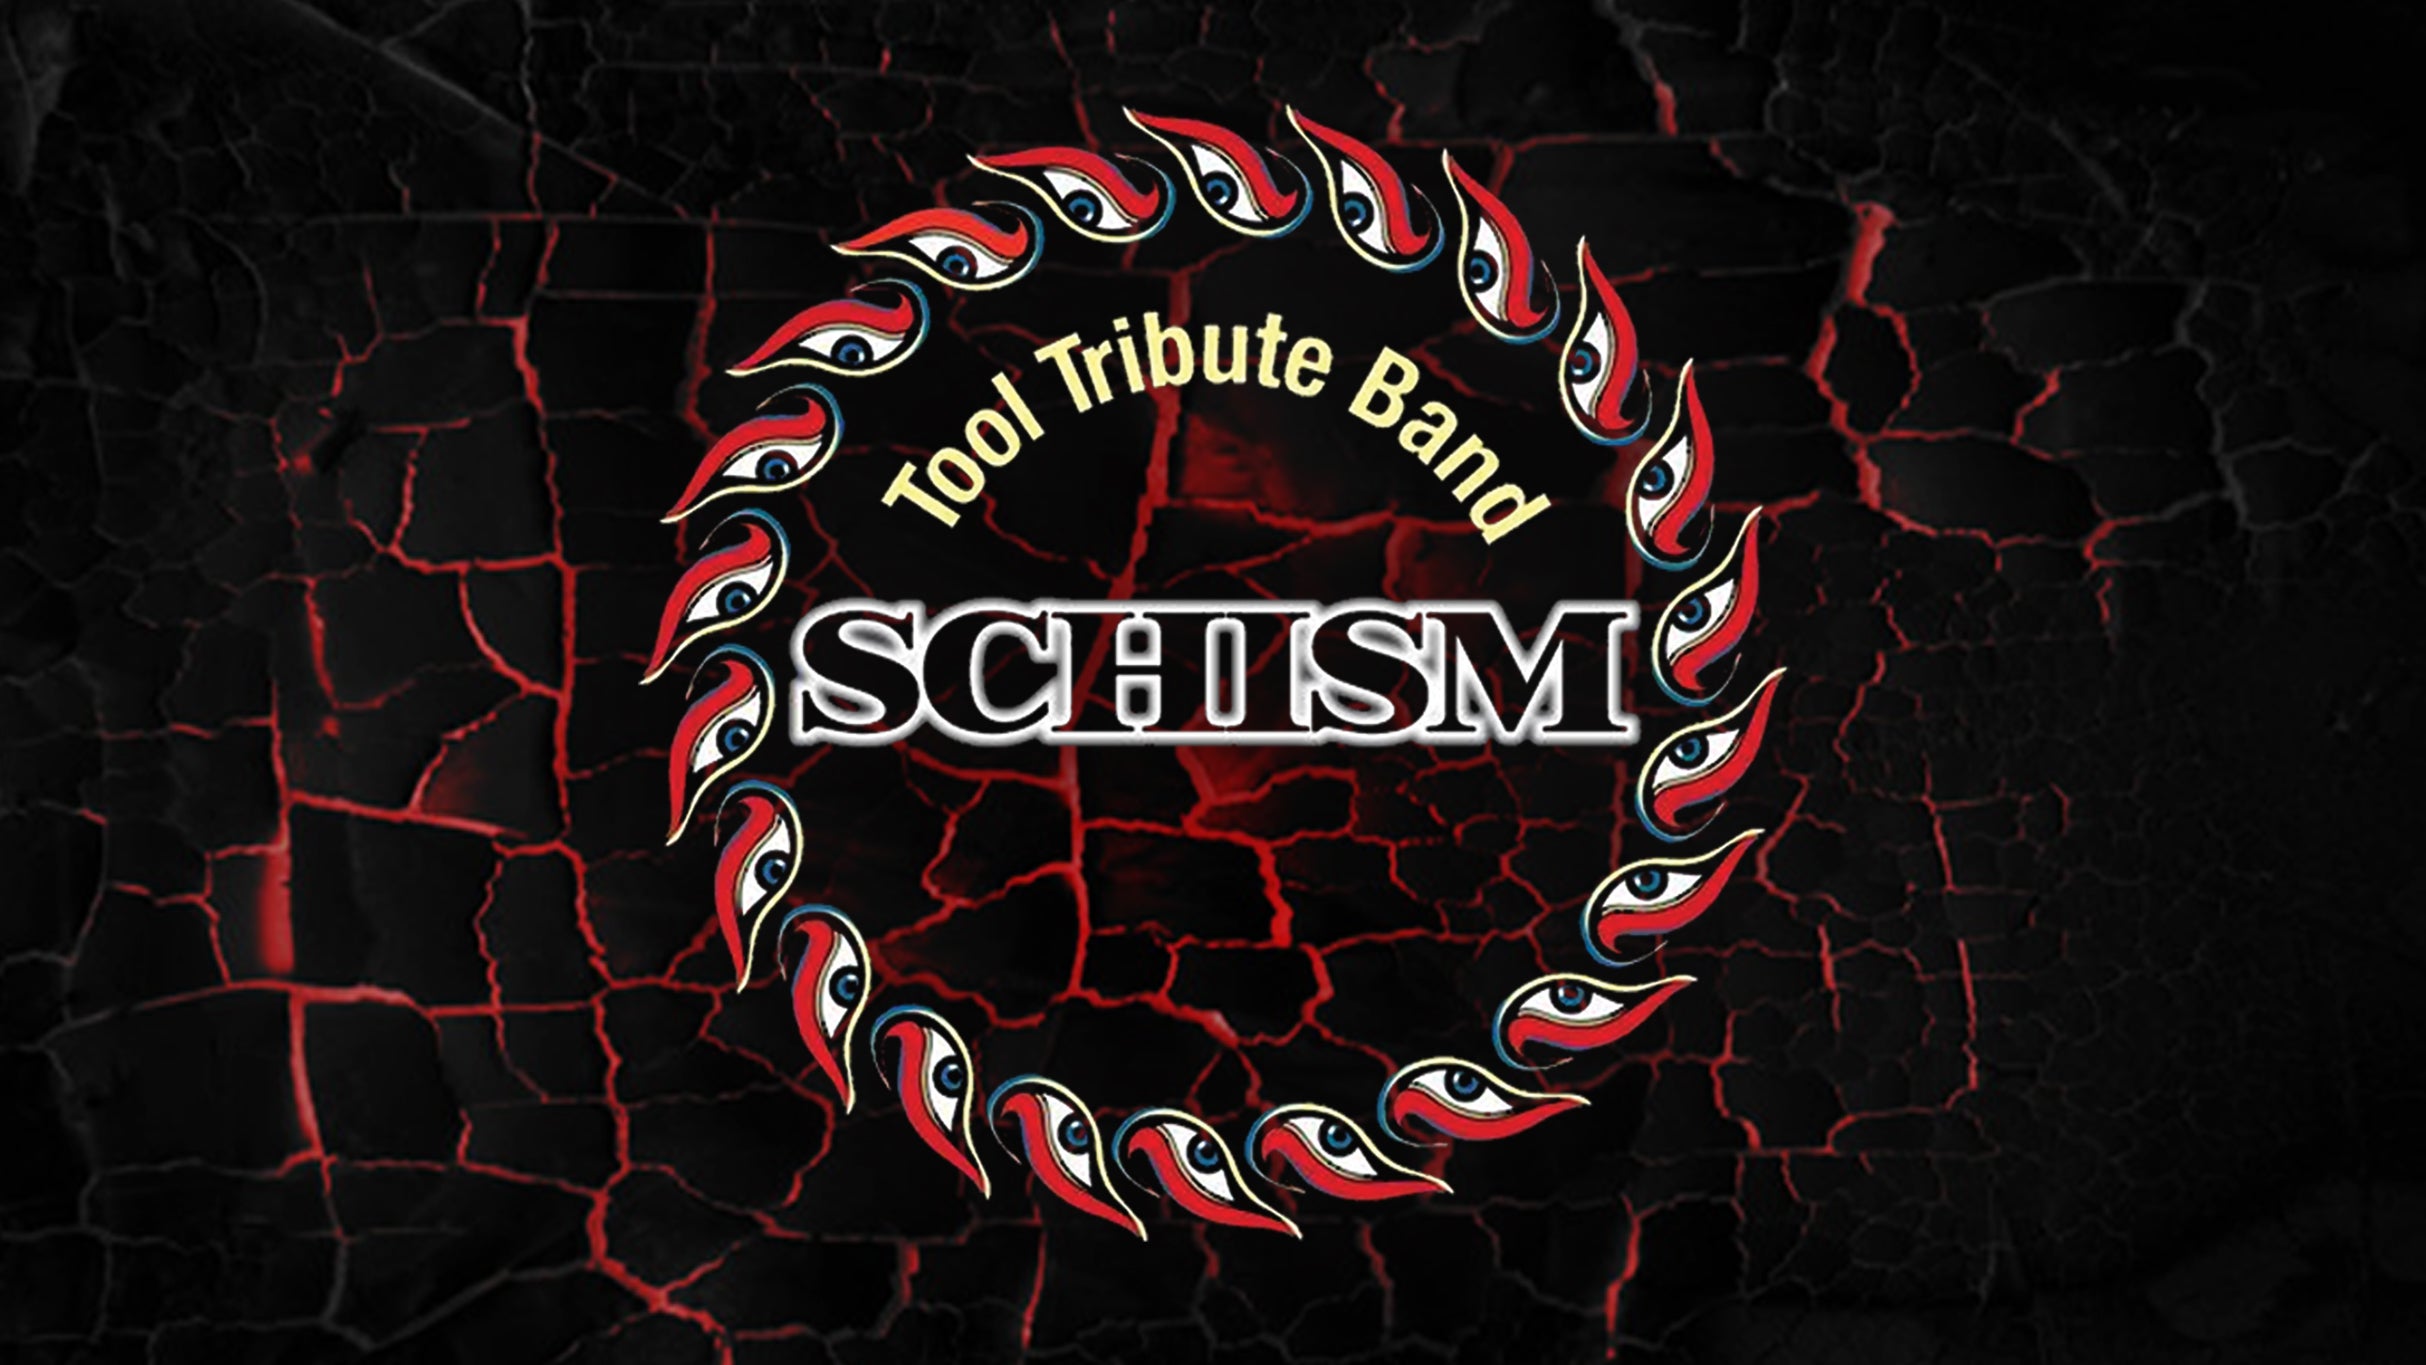 Schism (A Tribute To Tool), Xhilerate at Whisky A Go Go